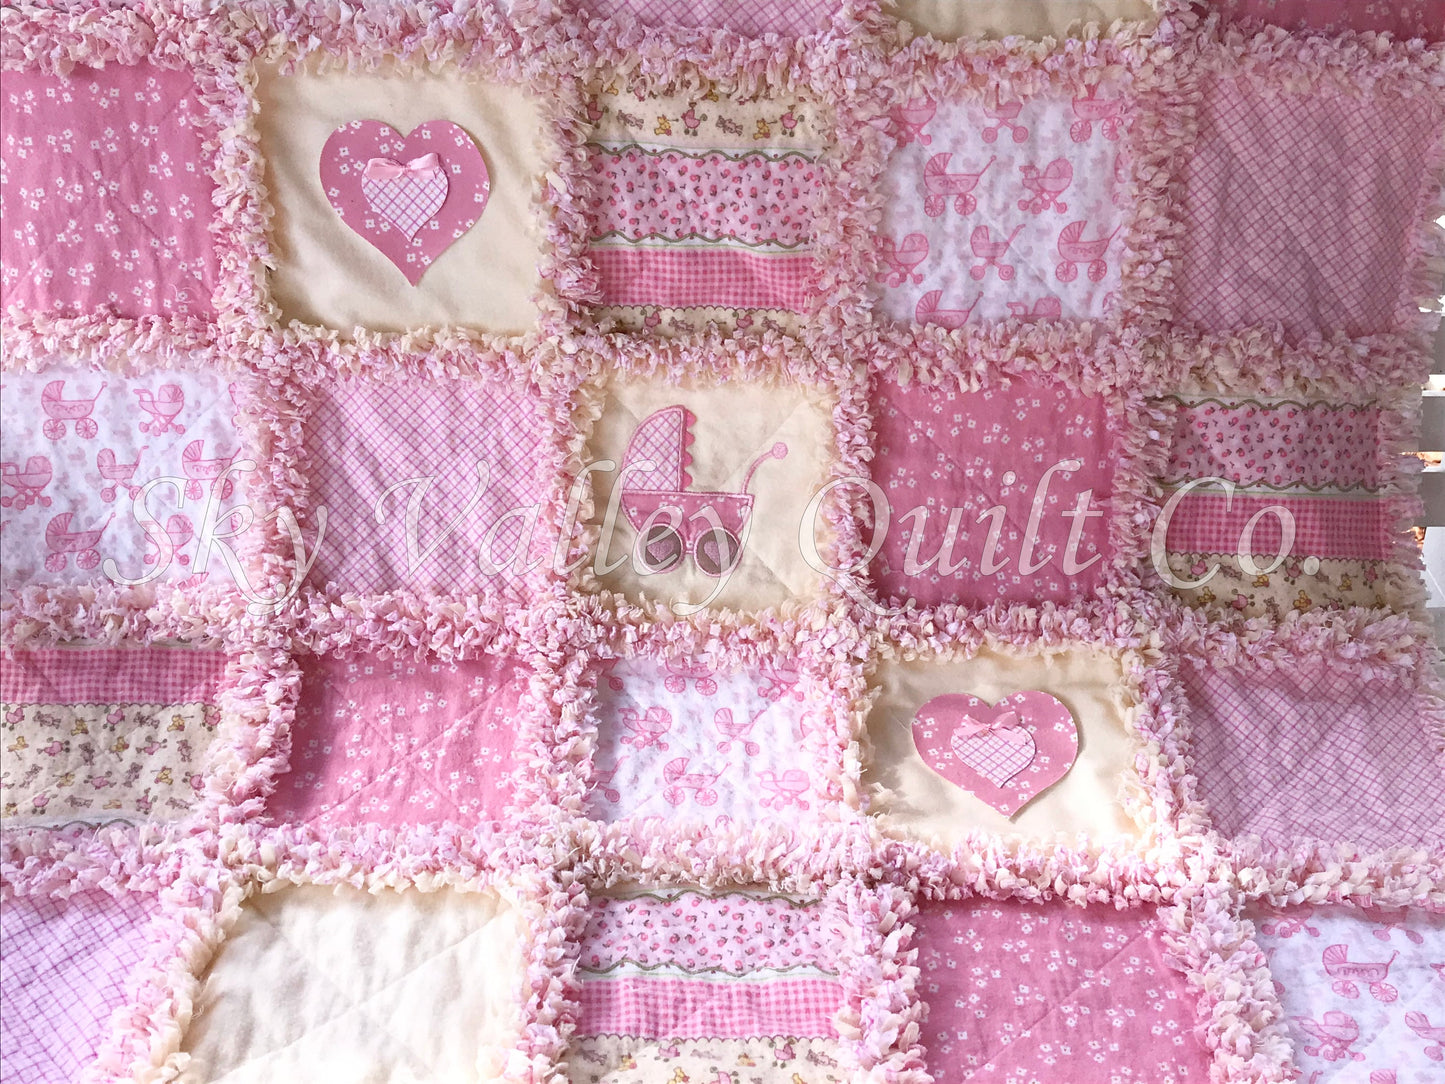 Pre Cut baby girl Rag Quilt KIT - Pink, cream, white baby buggy baby carriage, stroller